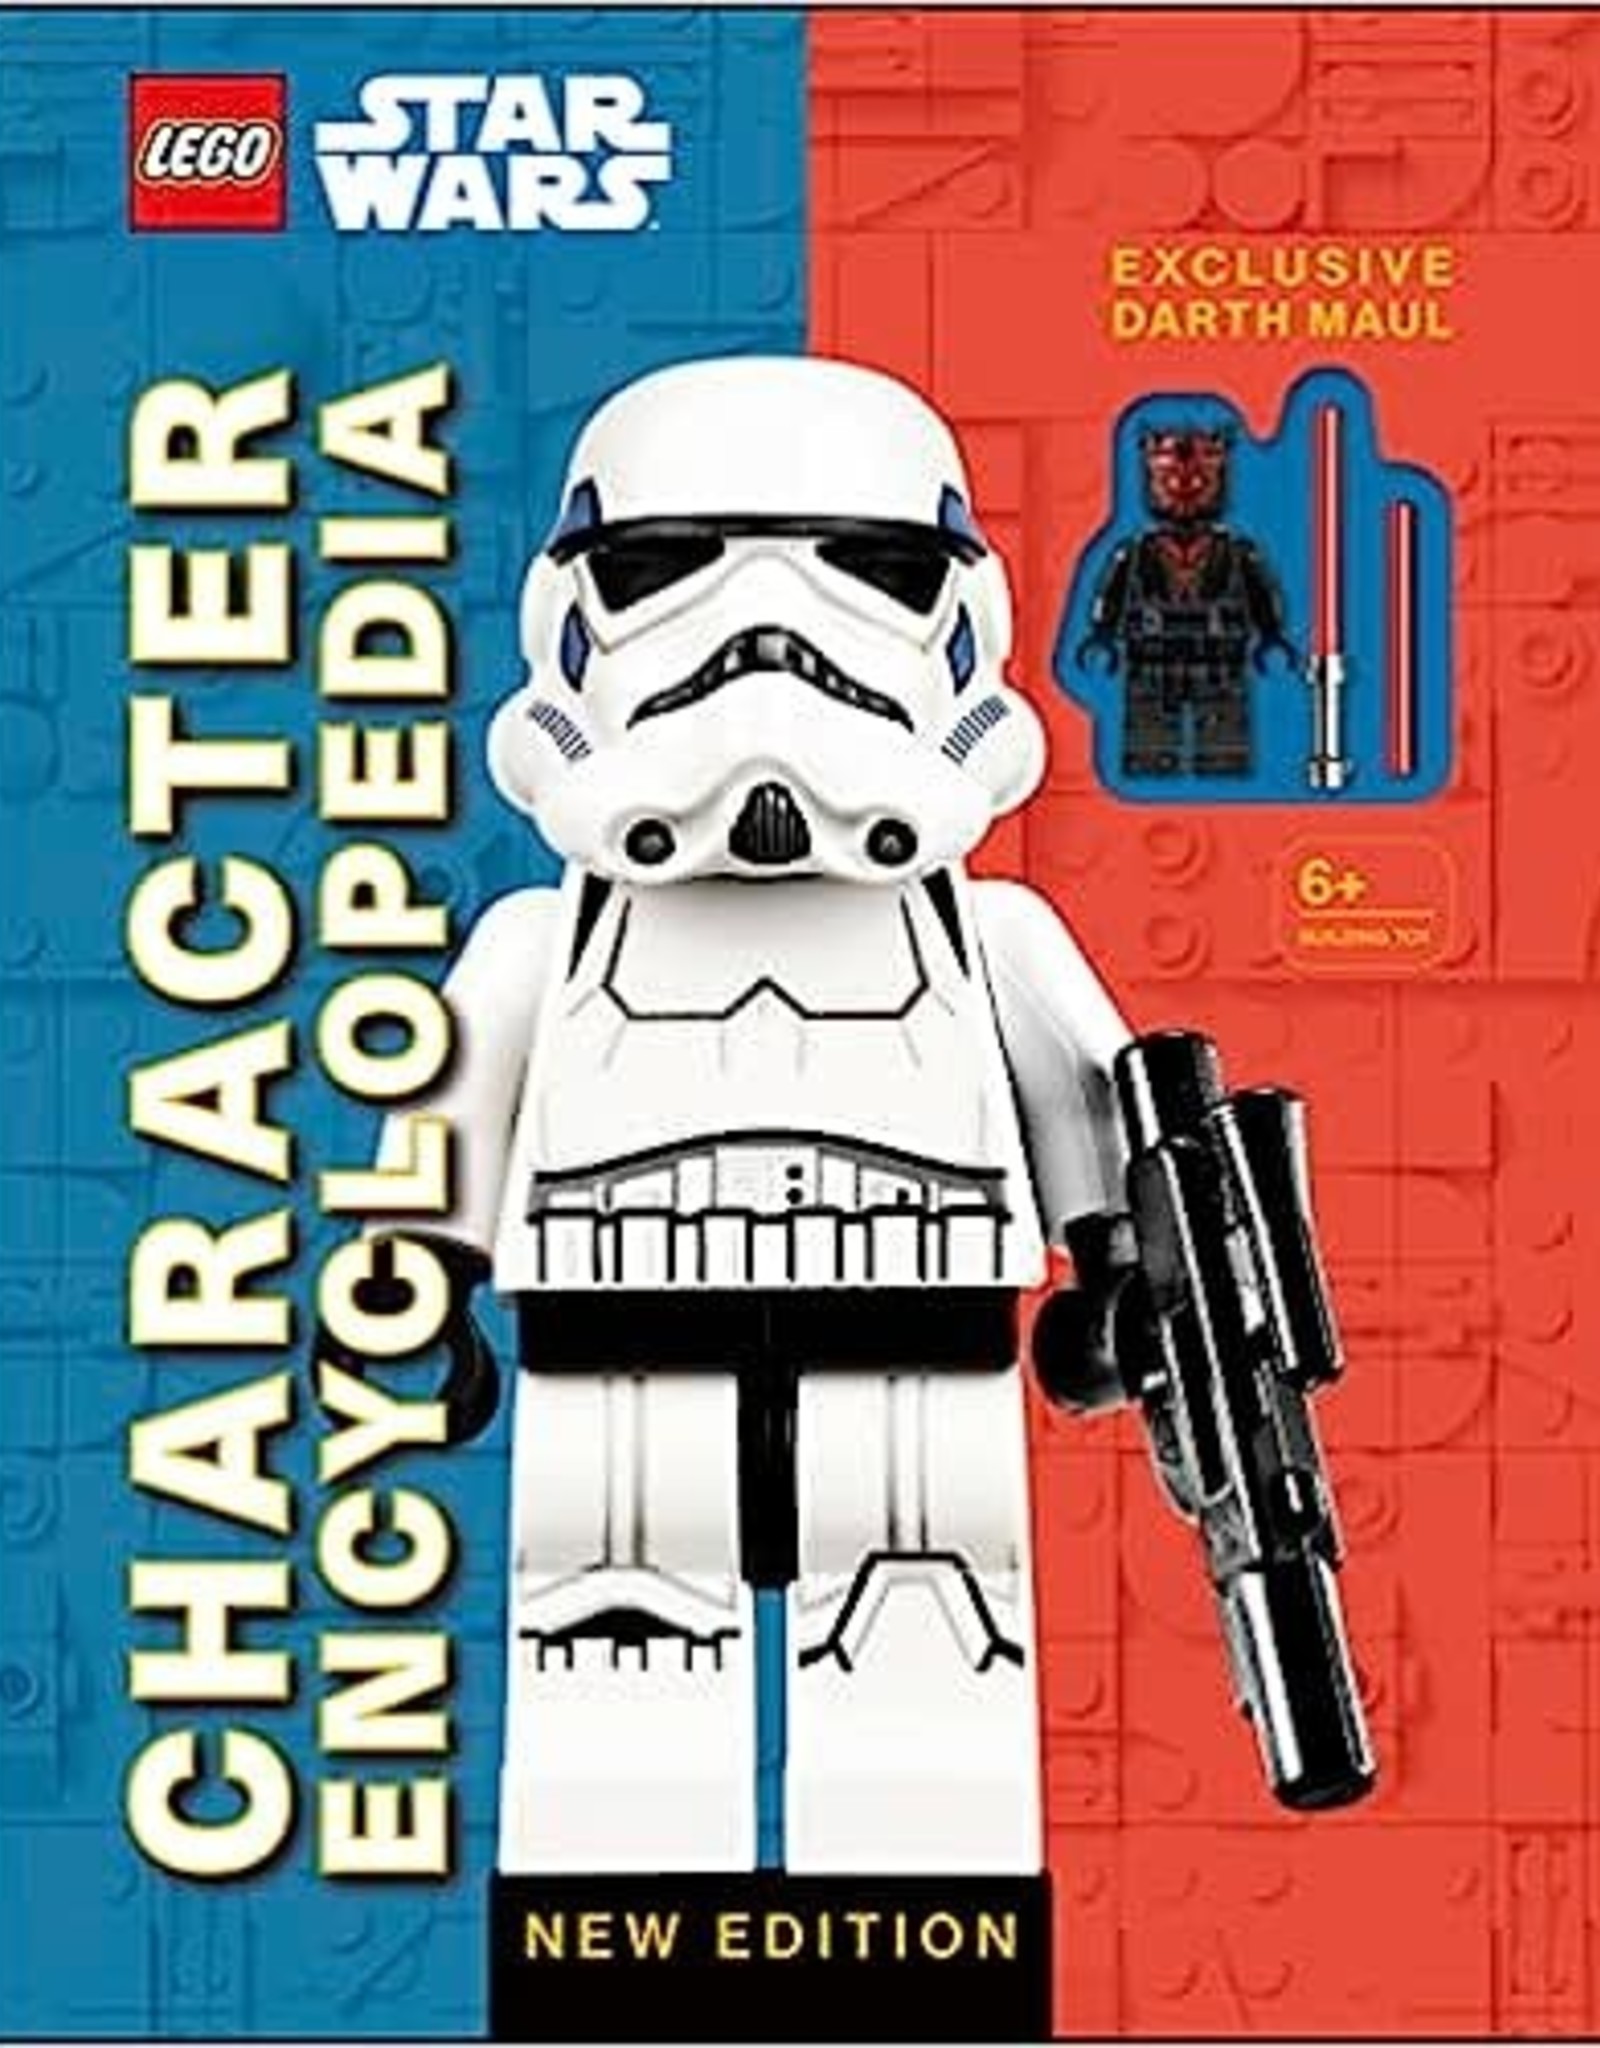 LEGO Classic LEGO Star Wars Character Encyclopedia New Edition: with Exclusive Darth Maul Minifigure